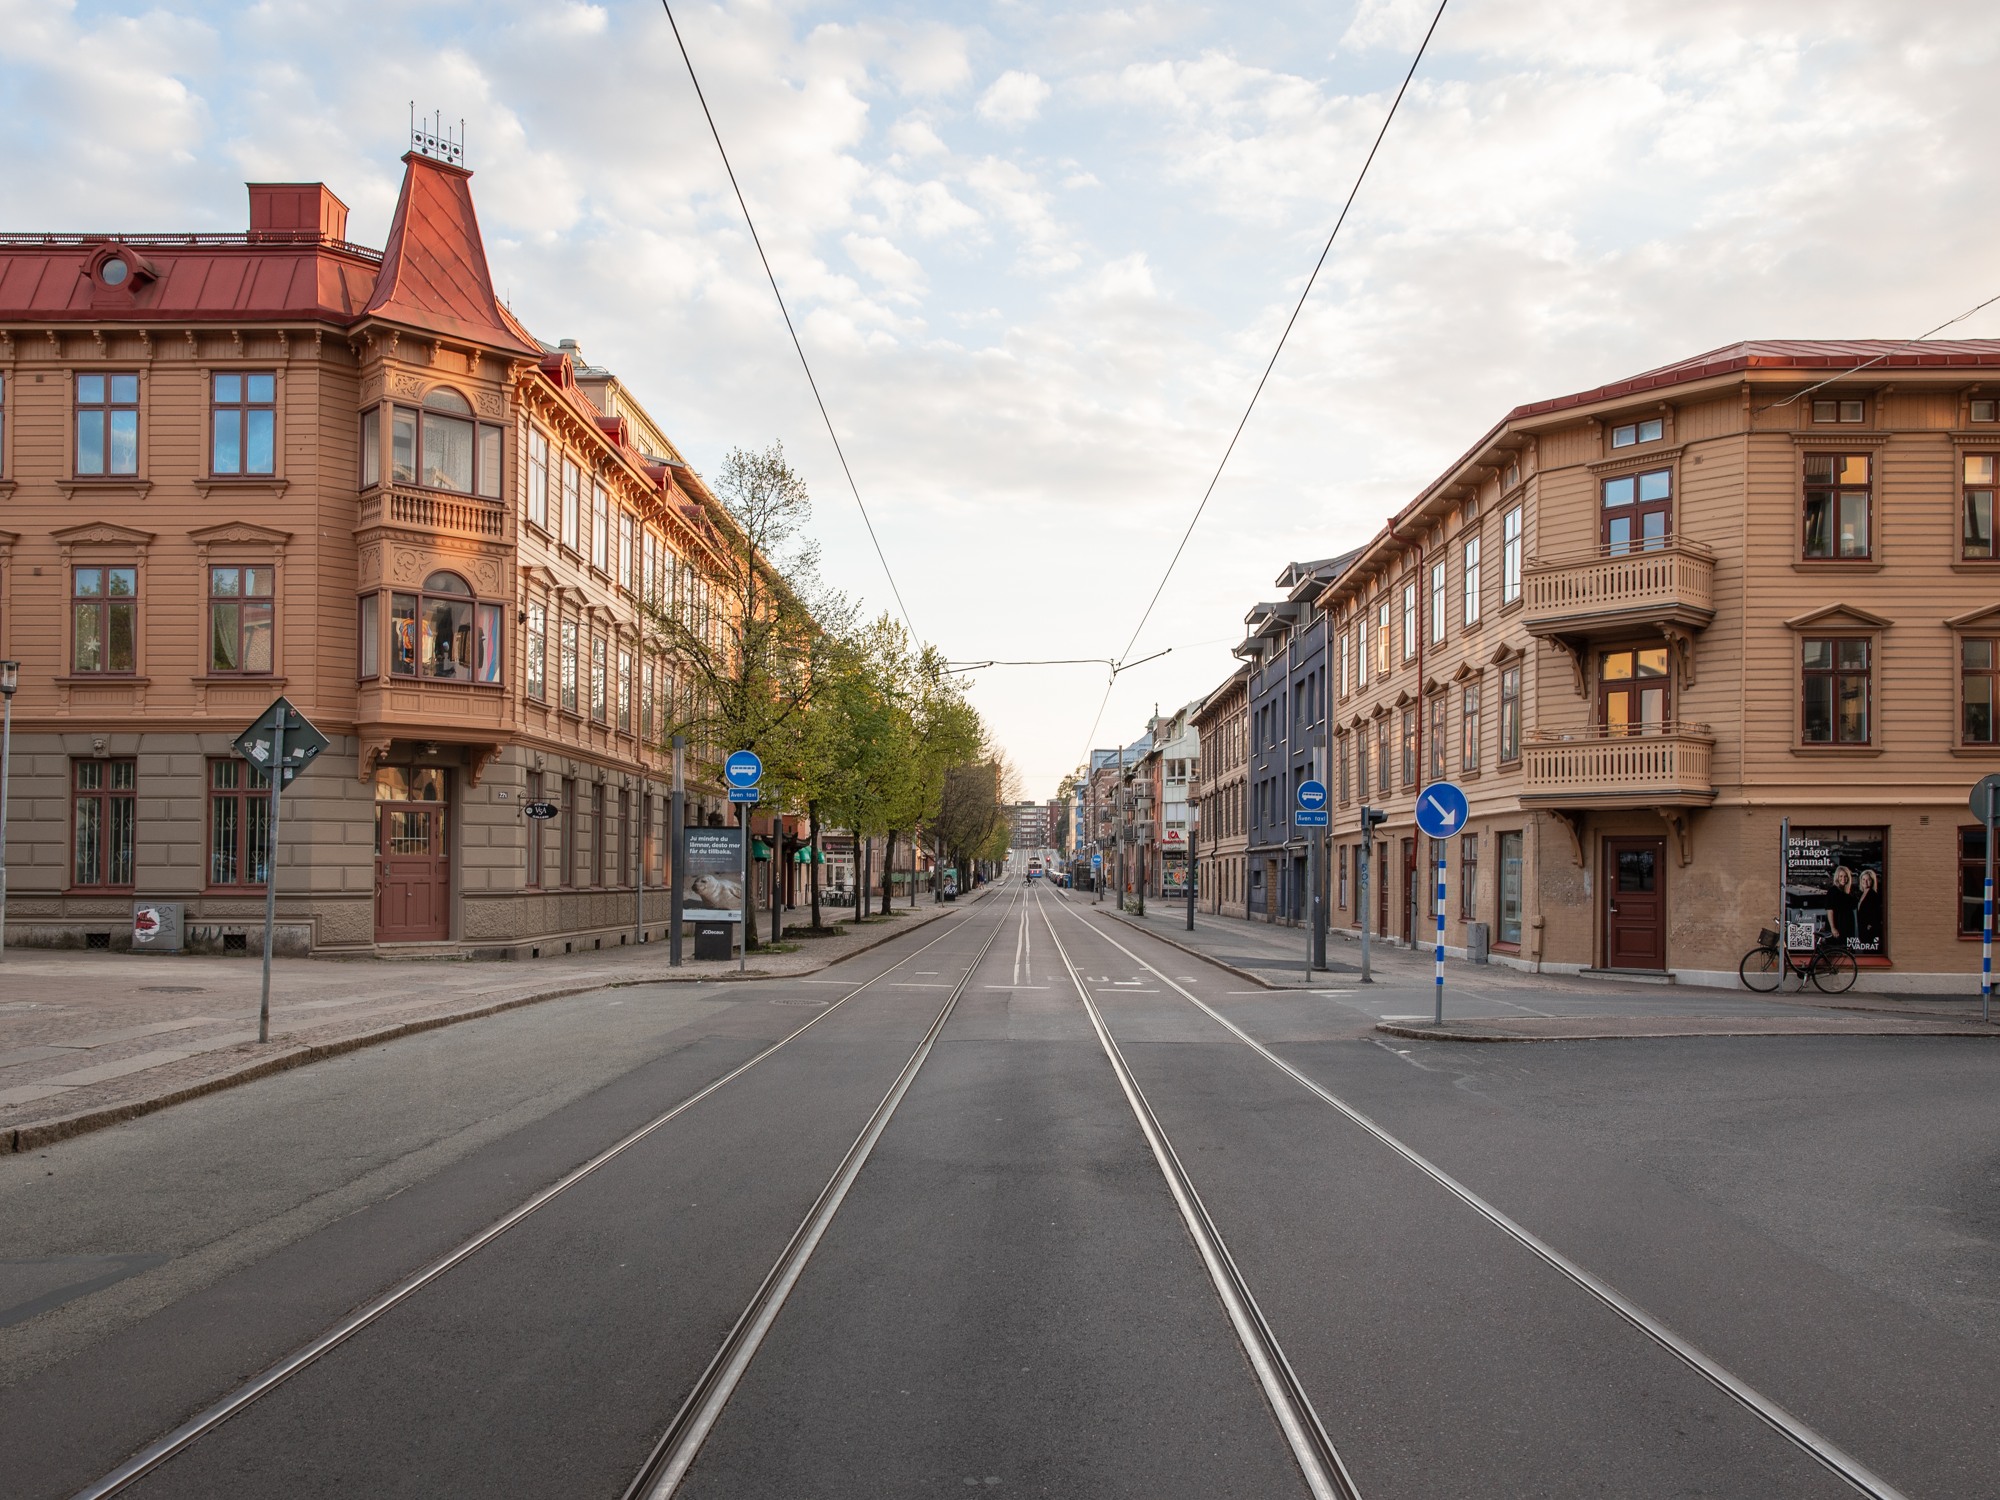 View of a street with tram tracks in the middle and orange buildings on each side of the street.